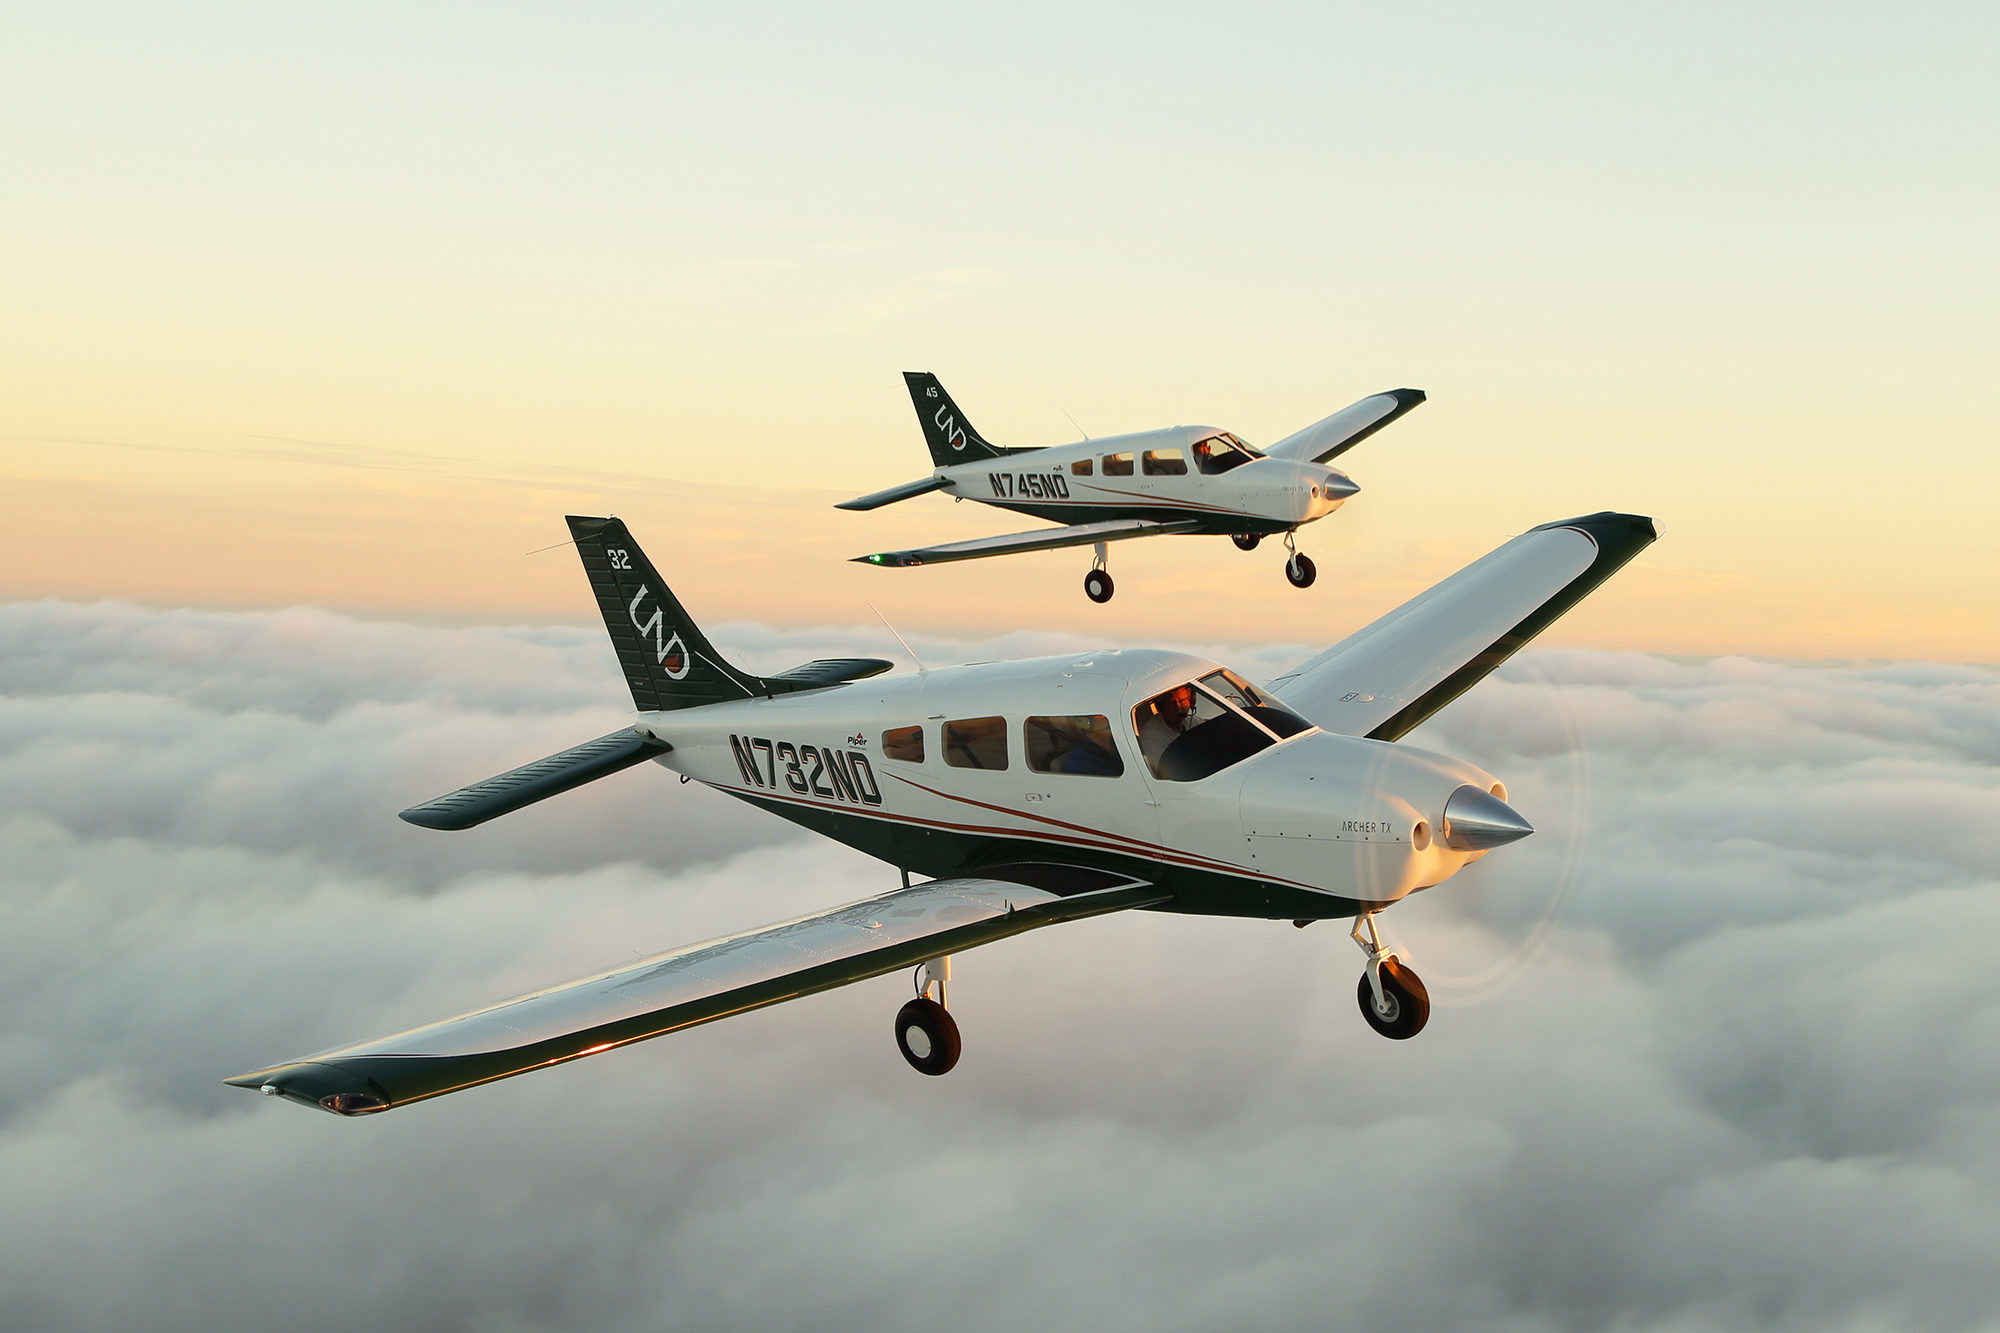 Two aircraft flying, both Archer TX trainer class from Piper Aircraft